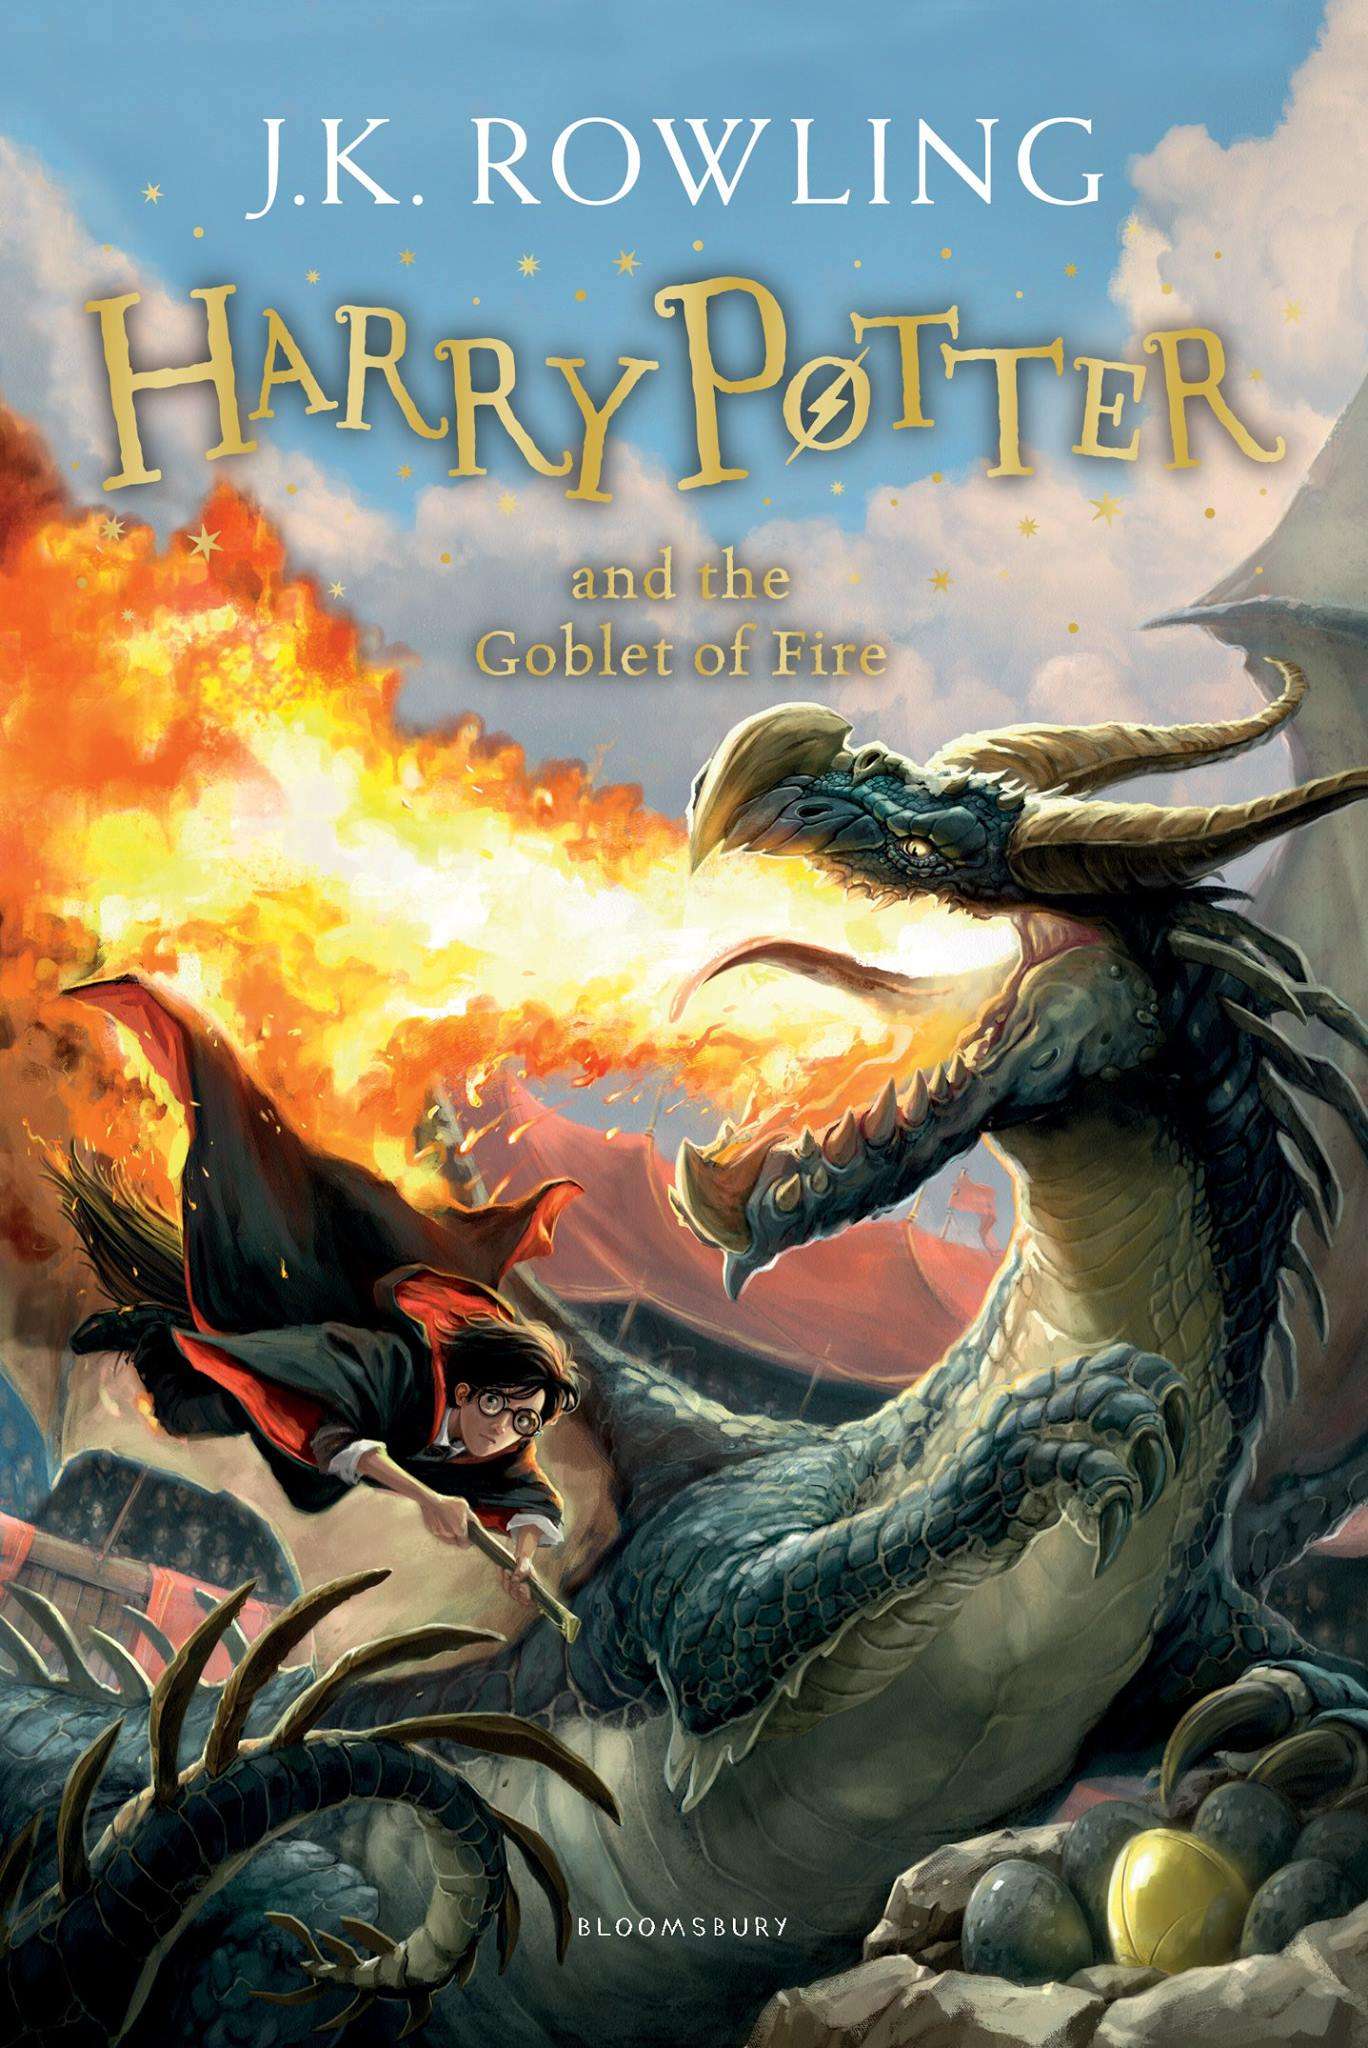 Harry Potter and the Goblet of Fire by J.K Rowling  Mr. Kelleher